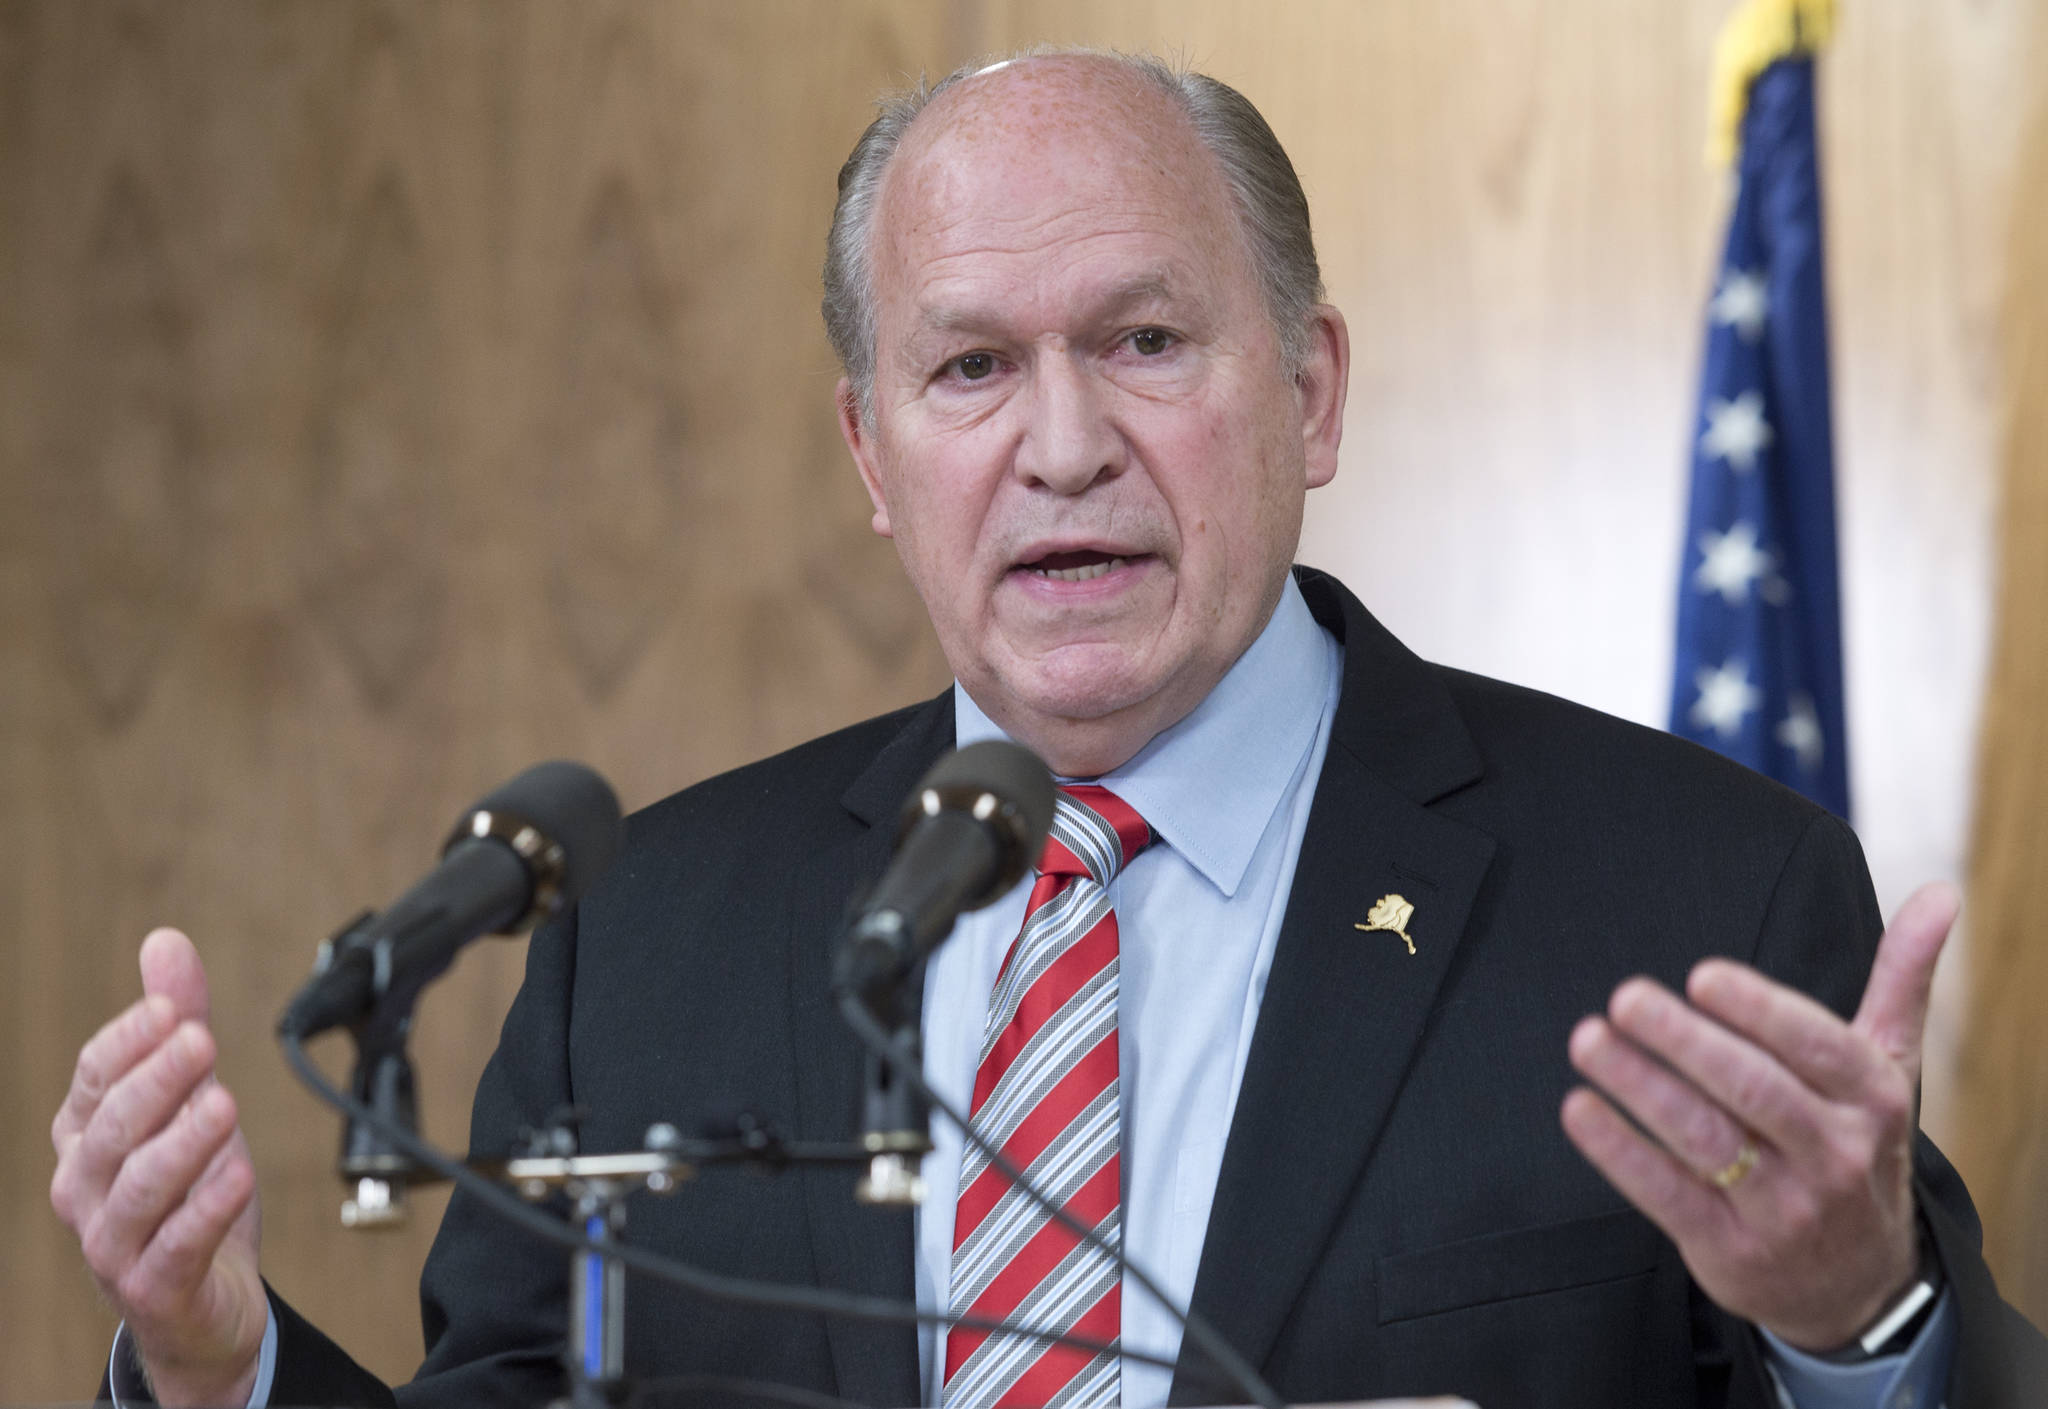 Gov. Bill Walker holds a press conference at the Capitol on Tuesday, April 18, 2017, to announce he has invited the Senate and House leadership to meet with him to work on an agreement on Alaska’s budget crisis. (Michael Penn | Juneau Empire)